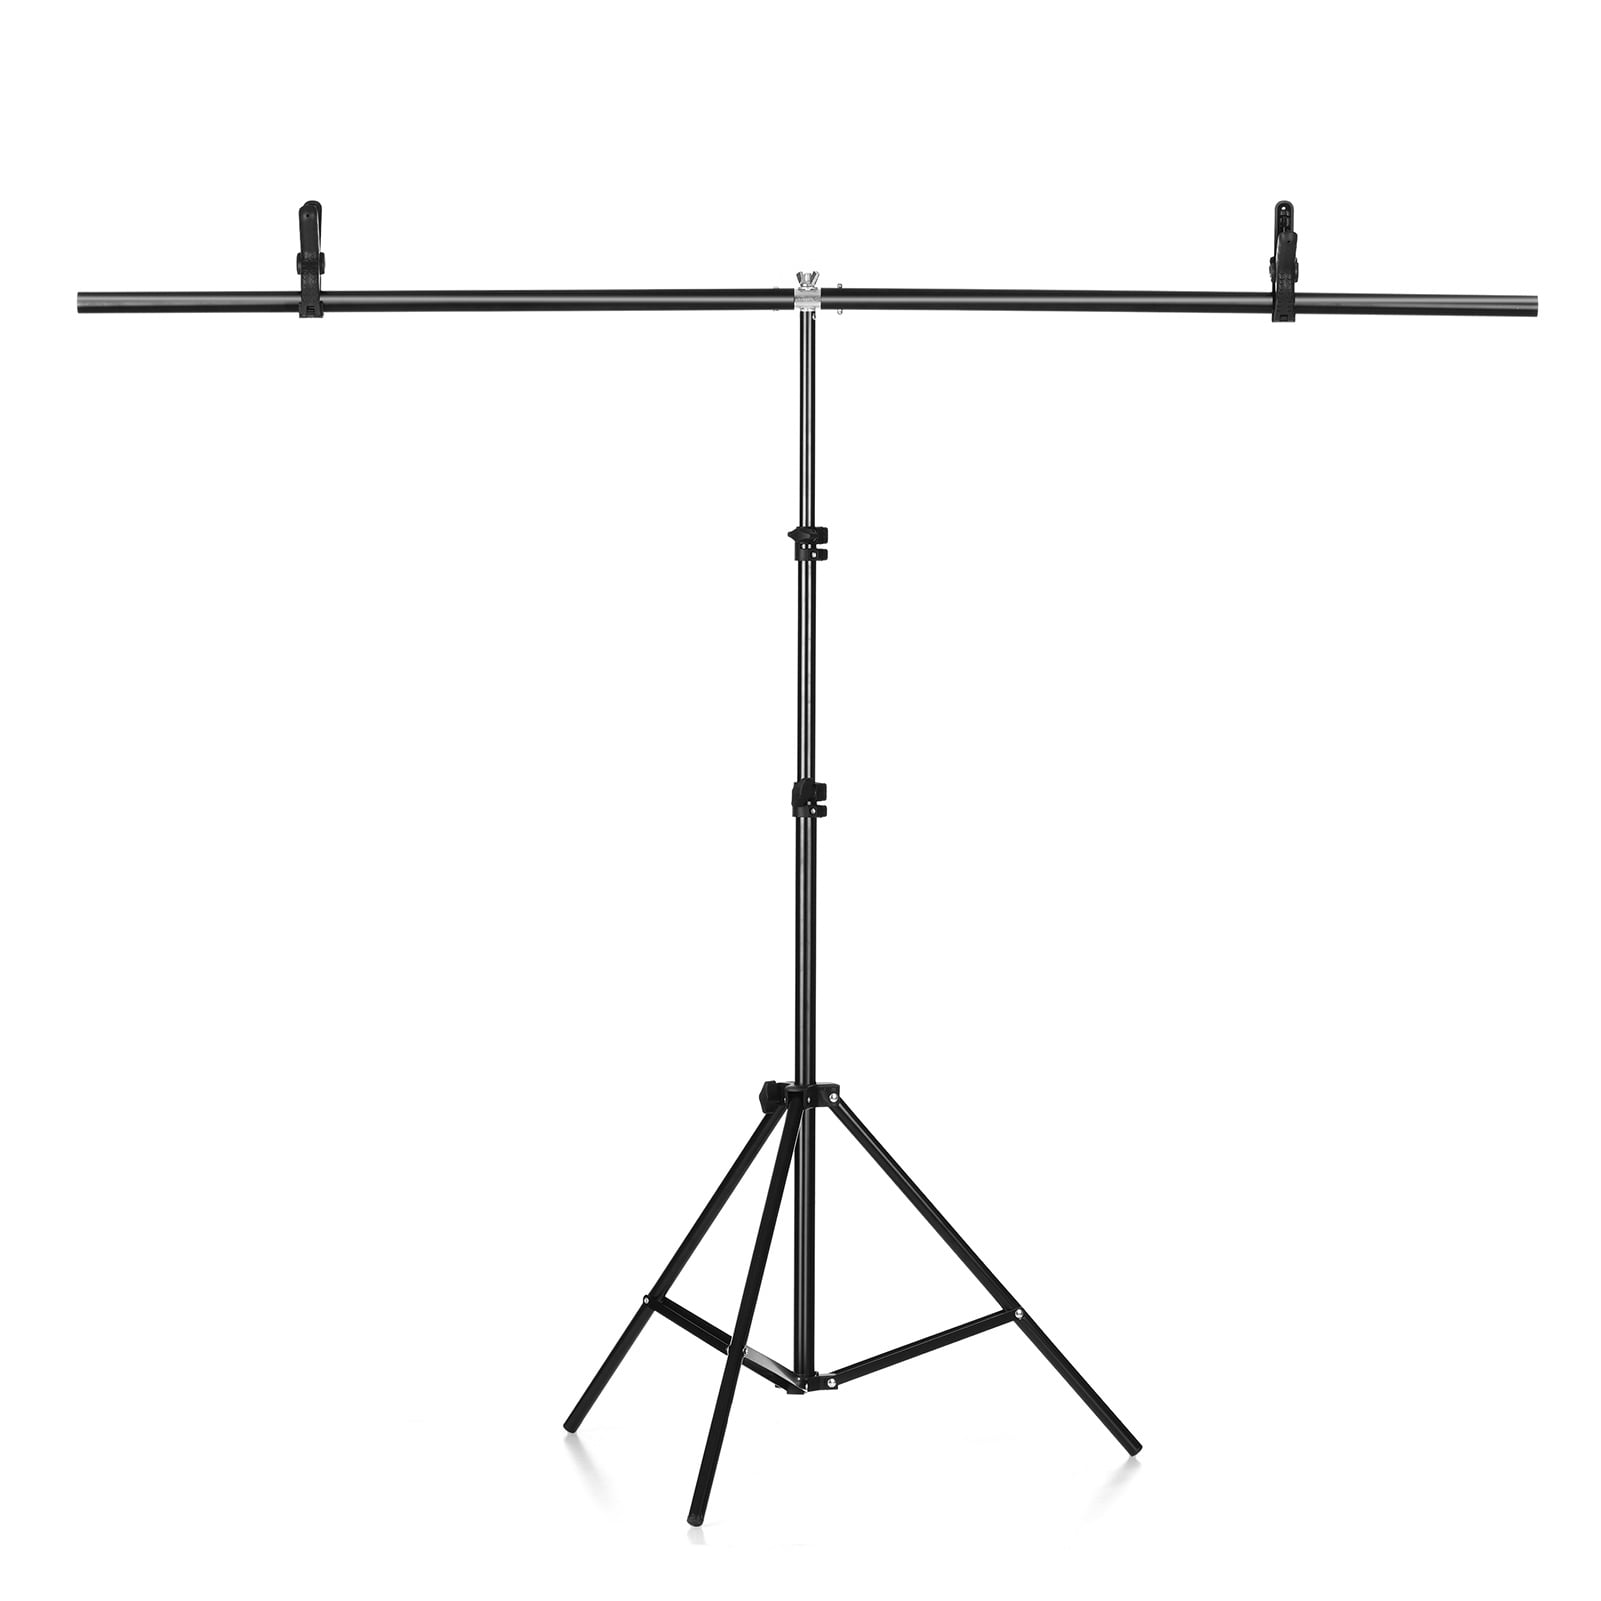 Photography T-Shape Background Backdrop Stand Frame Support System for Photo Studio Video Chroma Key Green Screen with Stand 